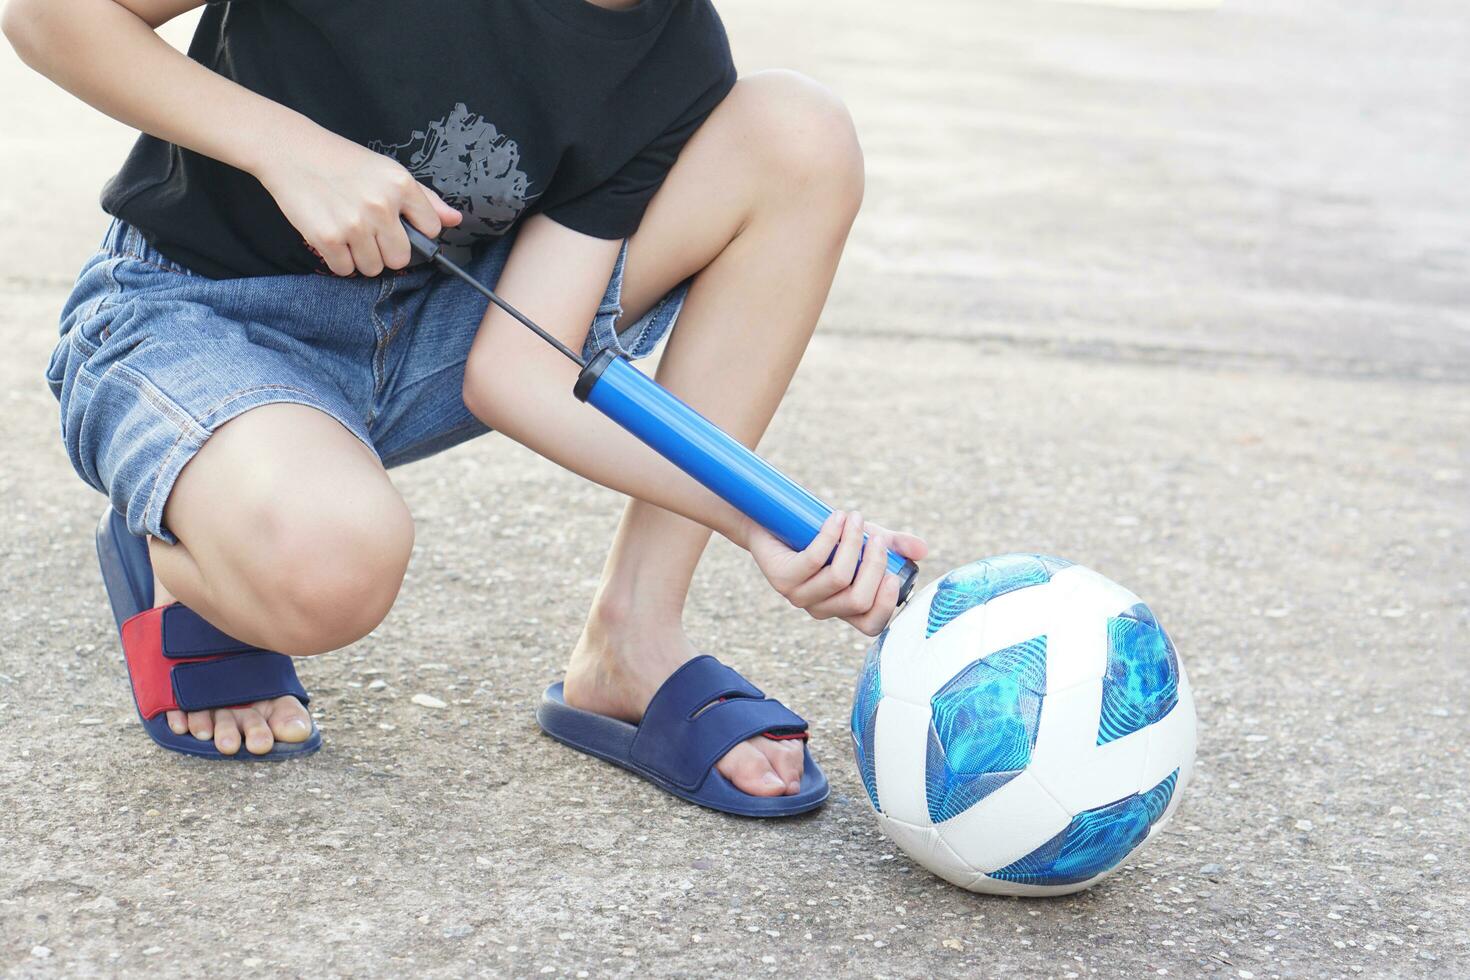 Closeup boy is pumping air into football. Concept, Portable sport equipment for inflating ball. Easy and convenient that kids can do themselves with a manual pump. photo